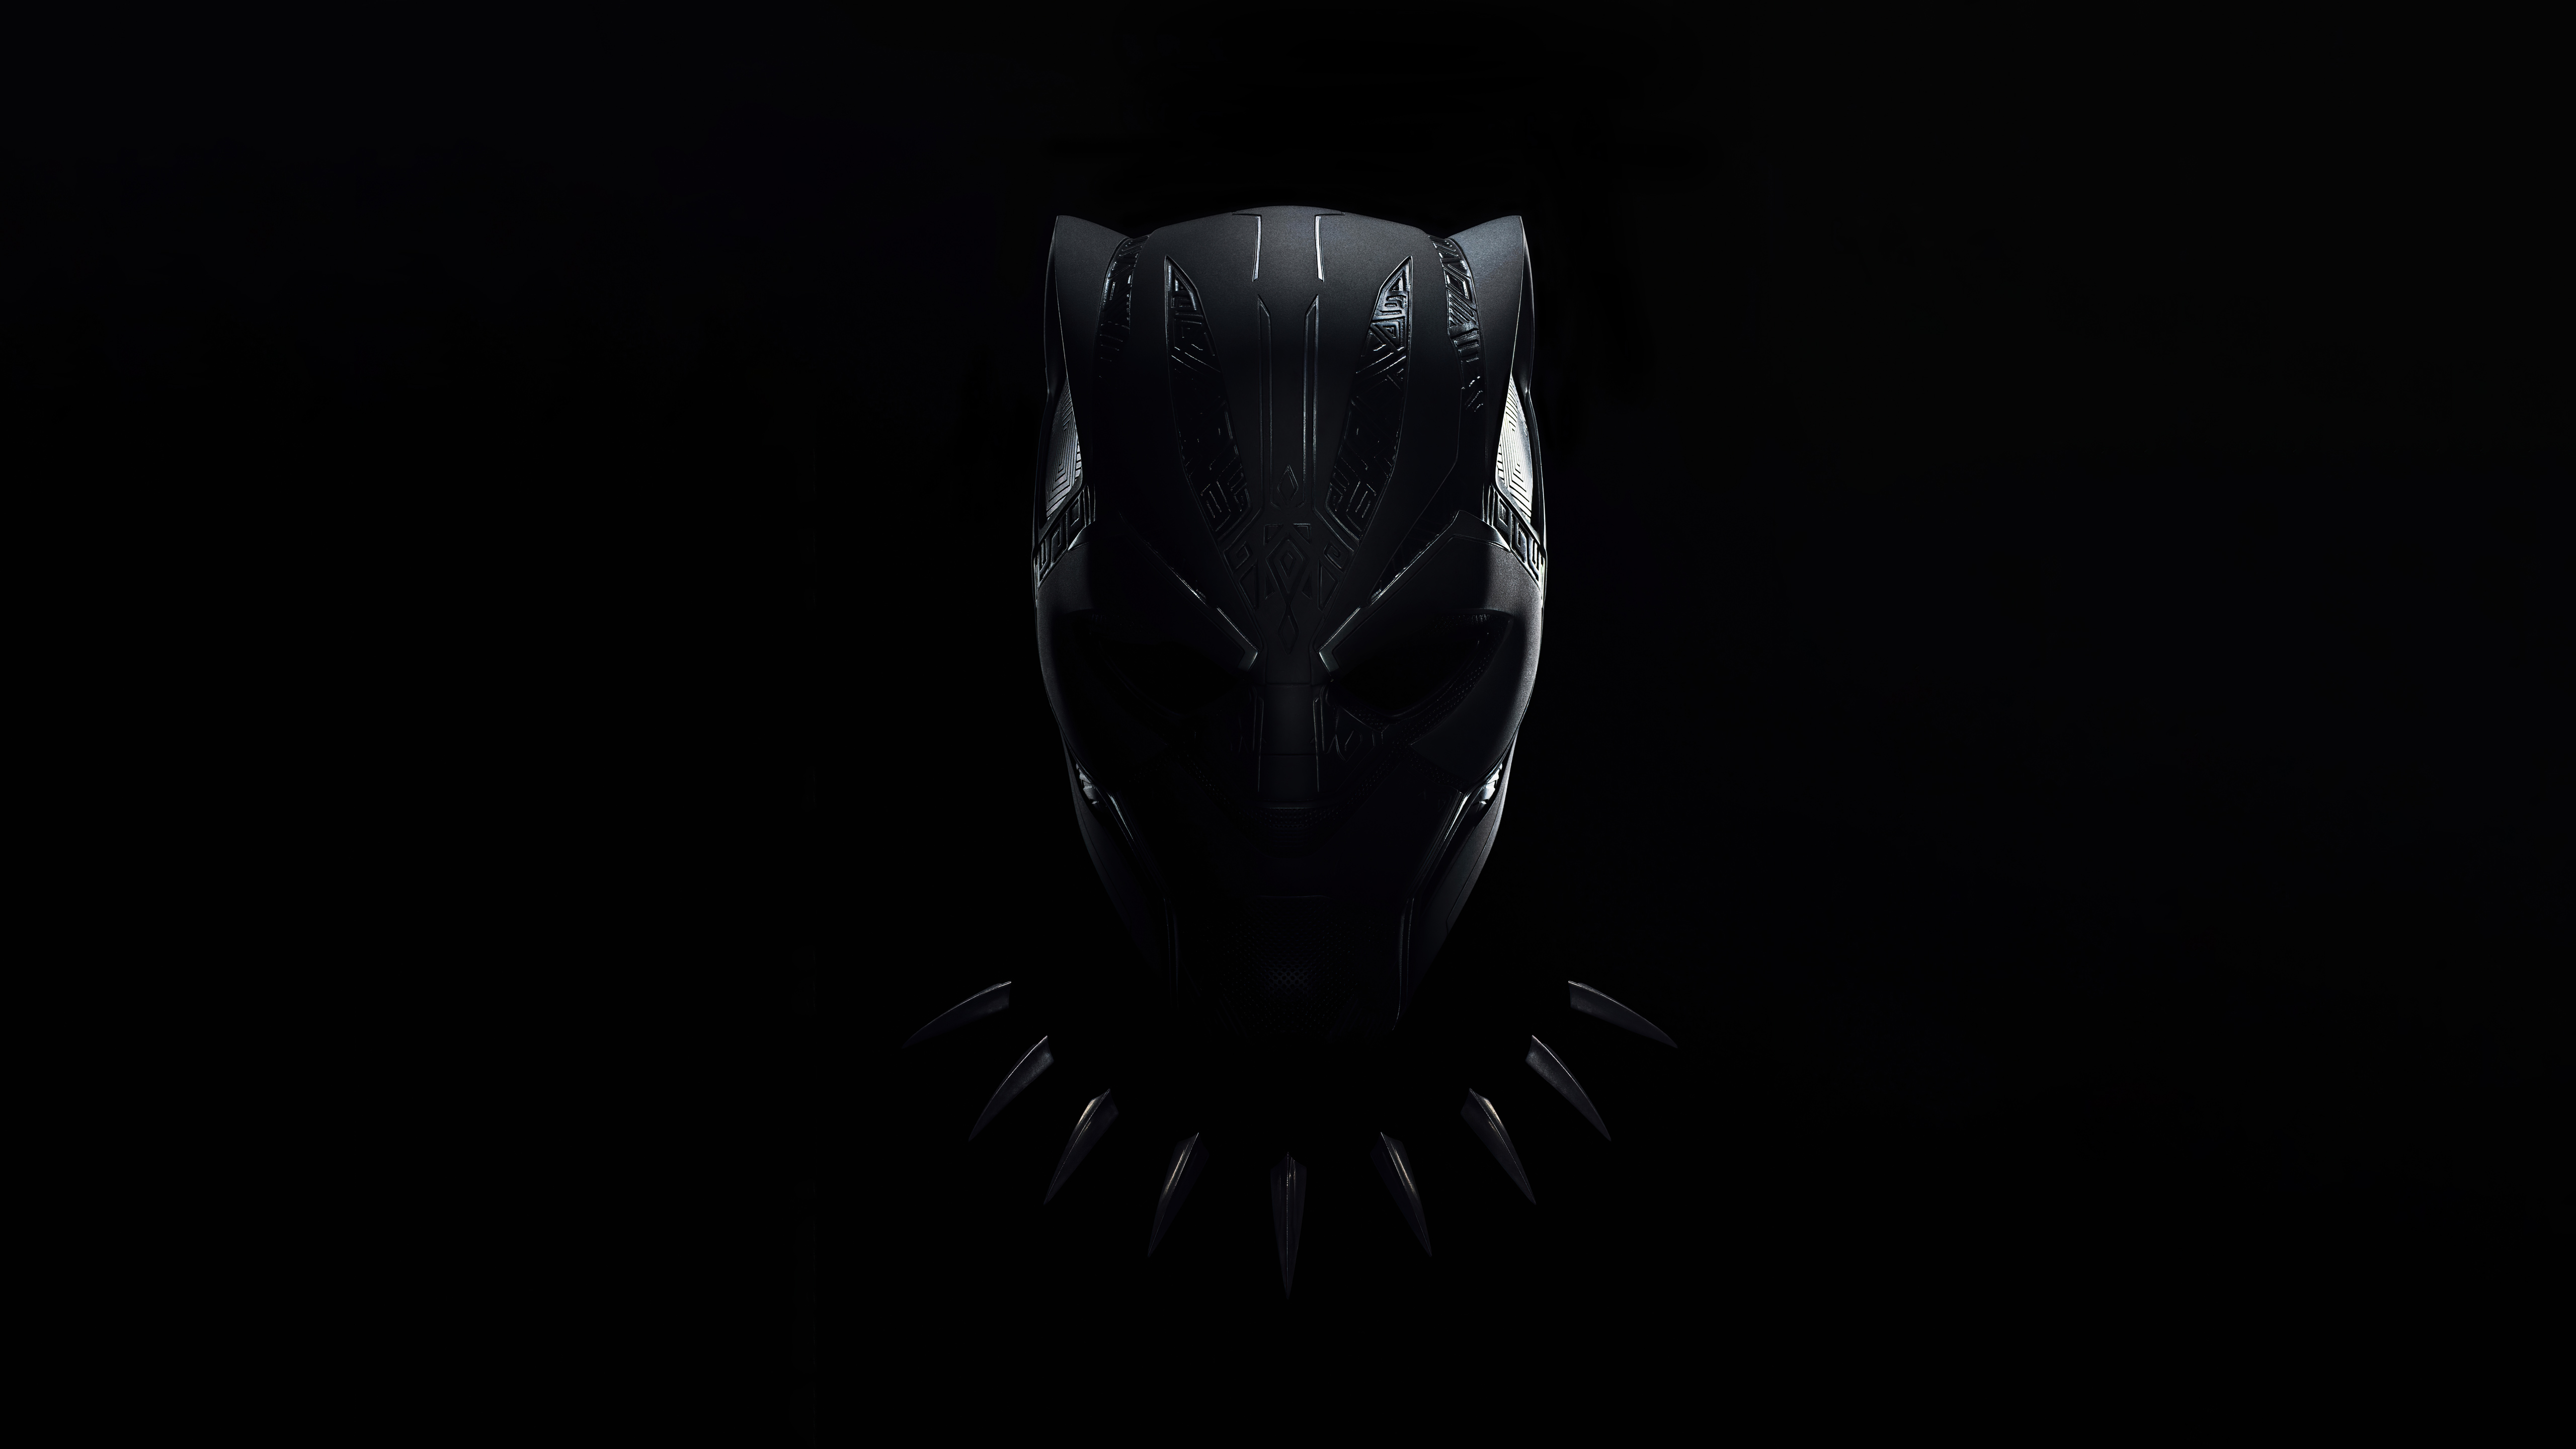 Black Panther 2 Wakanda Forever Exclusive Wallpaper  Superhero wallpaper  iphone Superhero wallpaper Black panther hd wallpaper